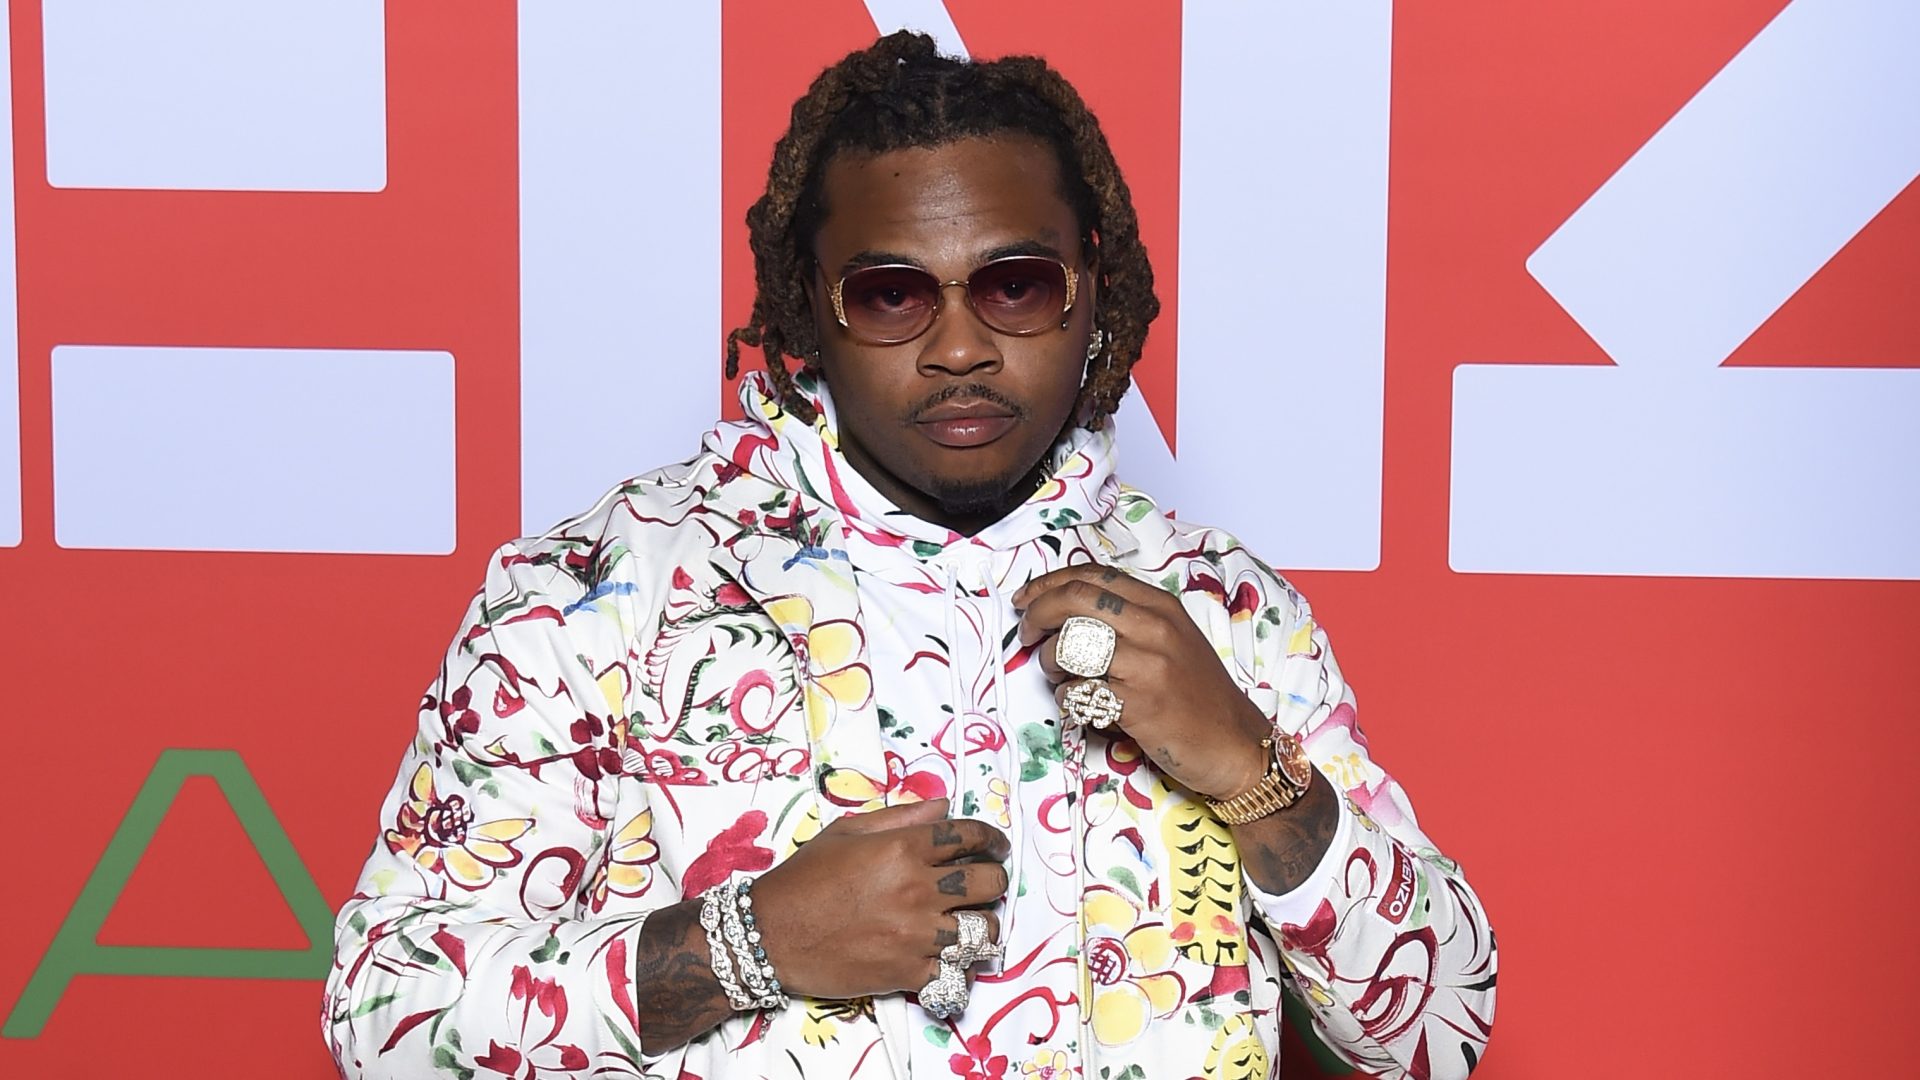 Gunna Releases First Music Video Since YSL Plea Deal